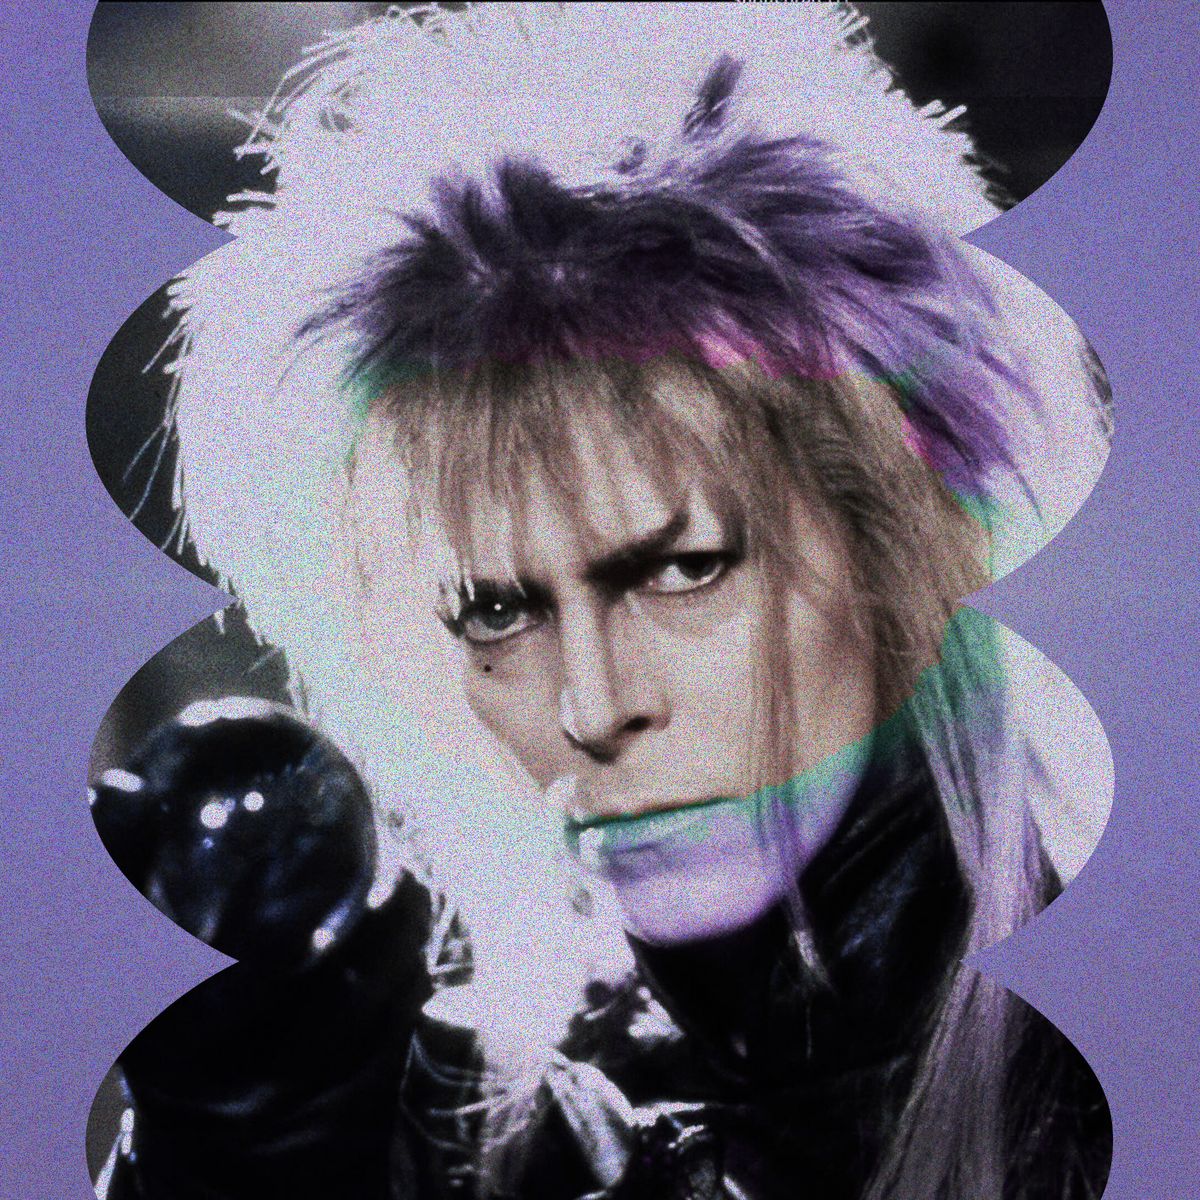 10 Things You Didn't Know About David Bowie's 'Labyrinth'